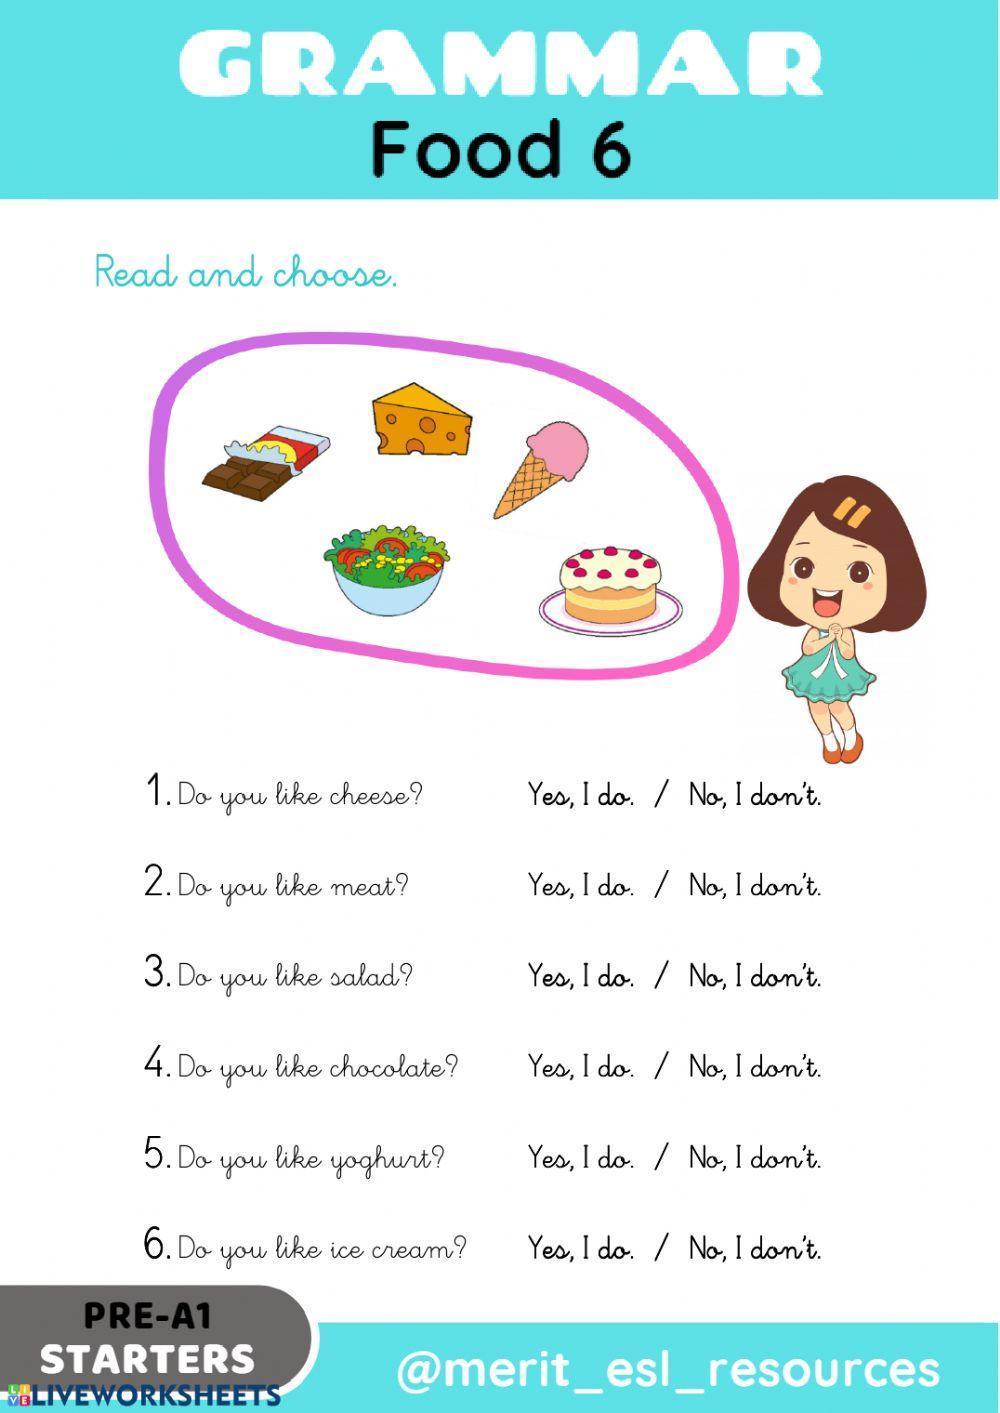 Food - Read and choose